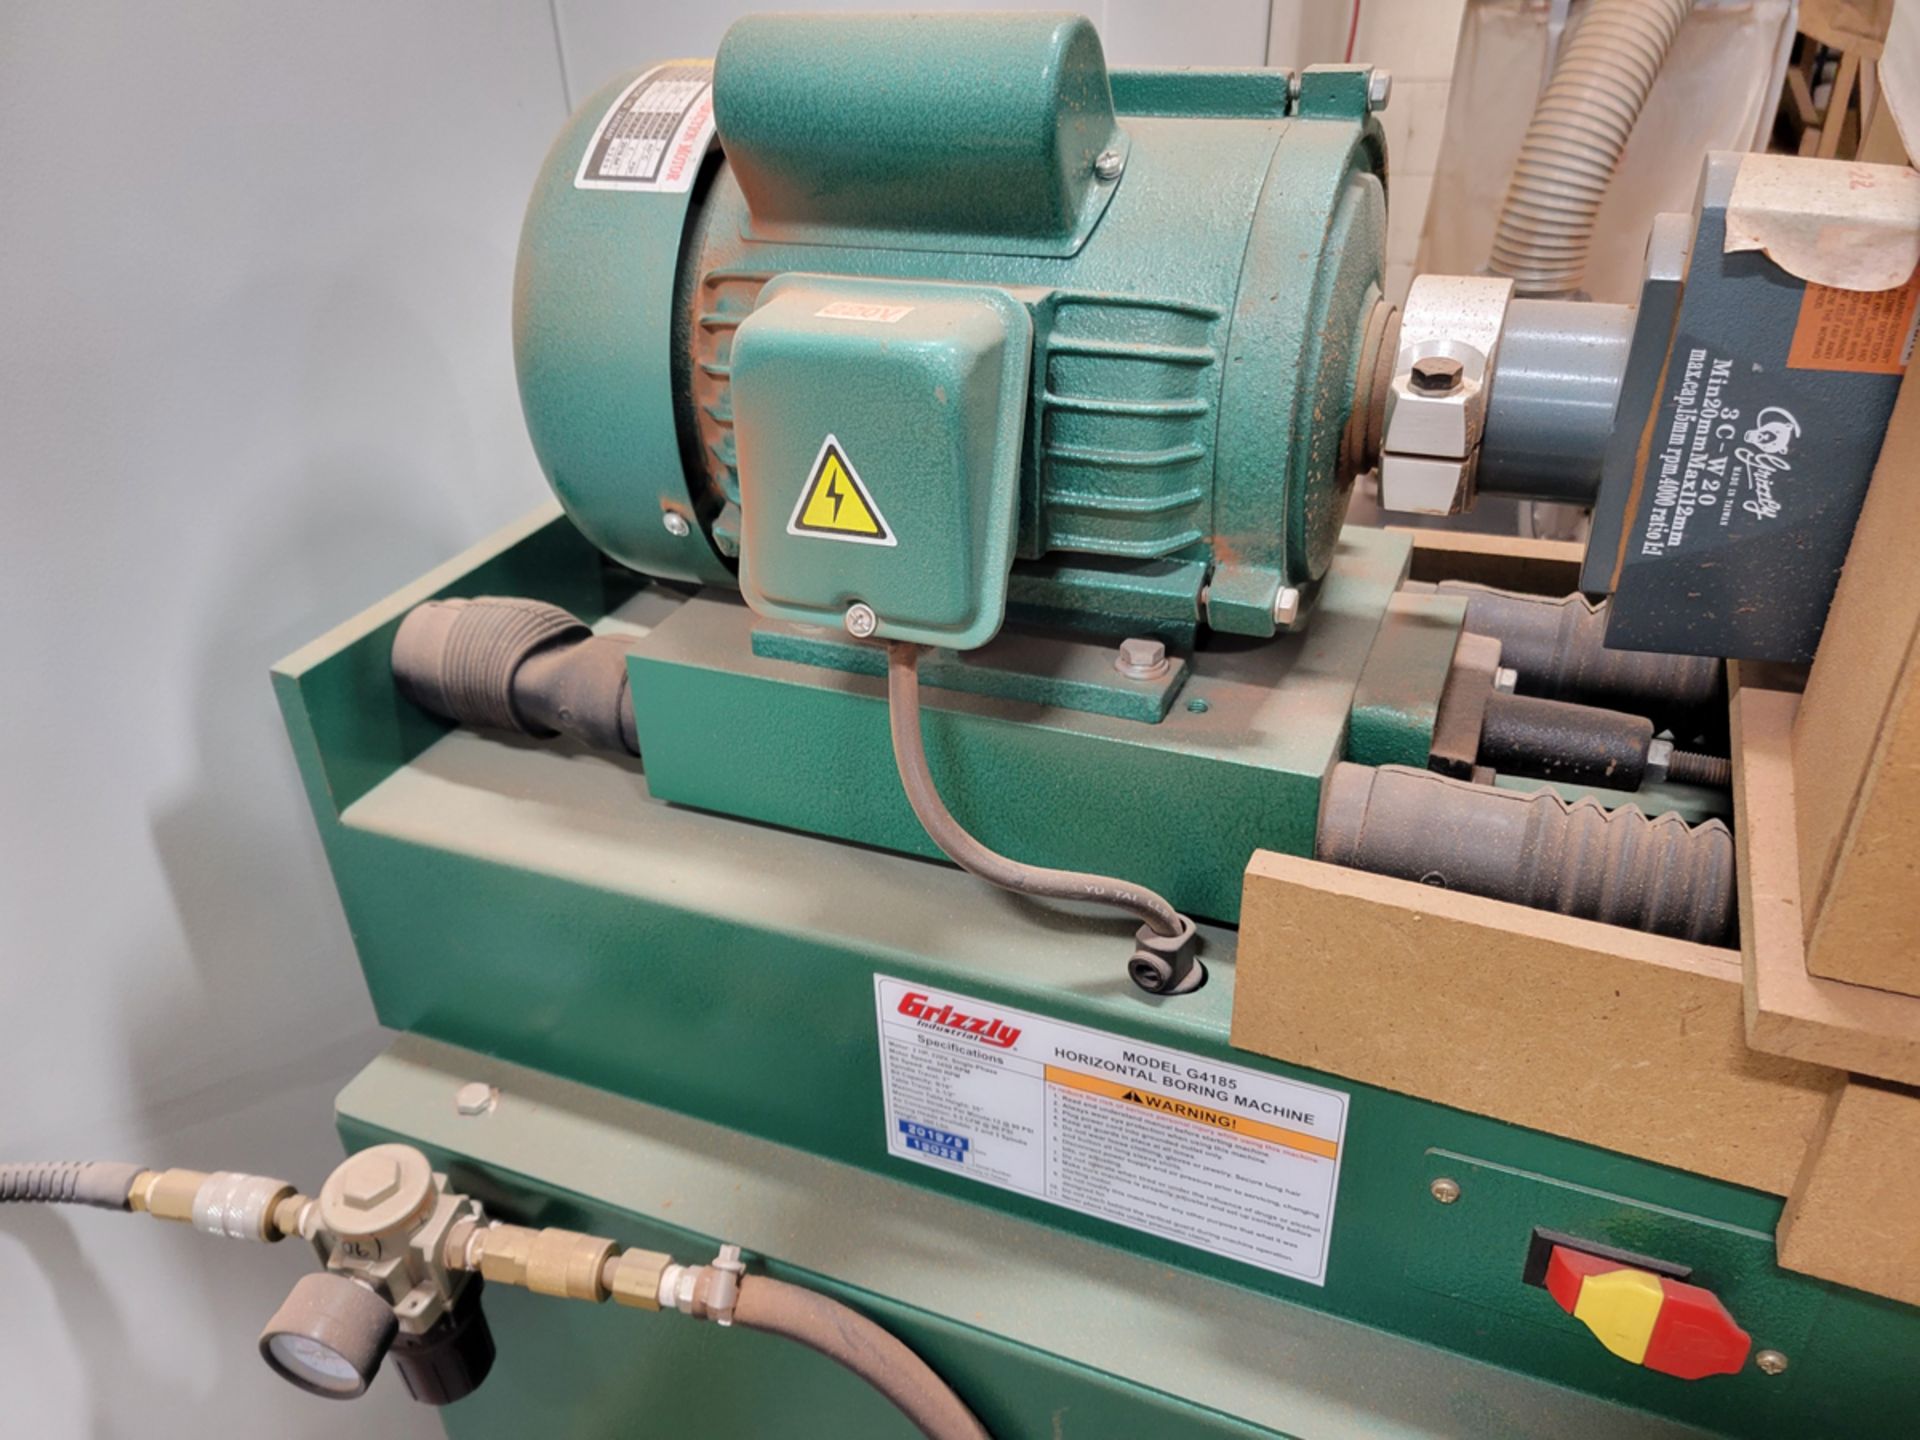 Grizzly Industrial Model: G4185 Horizontal Boring Machine - Image 8 of 9